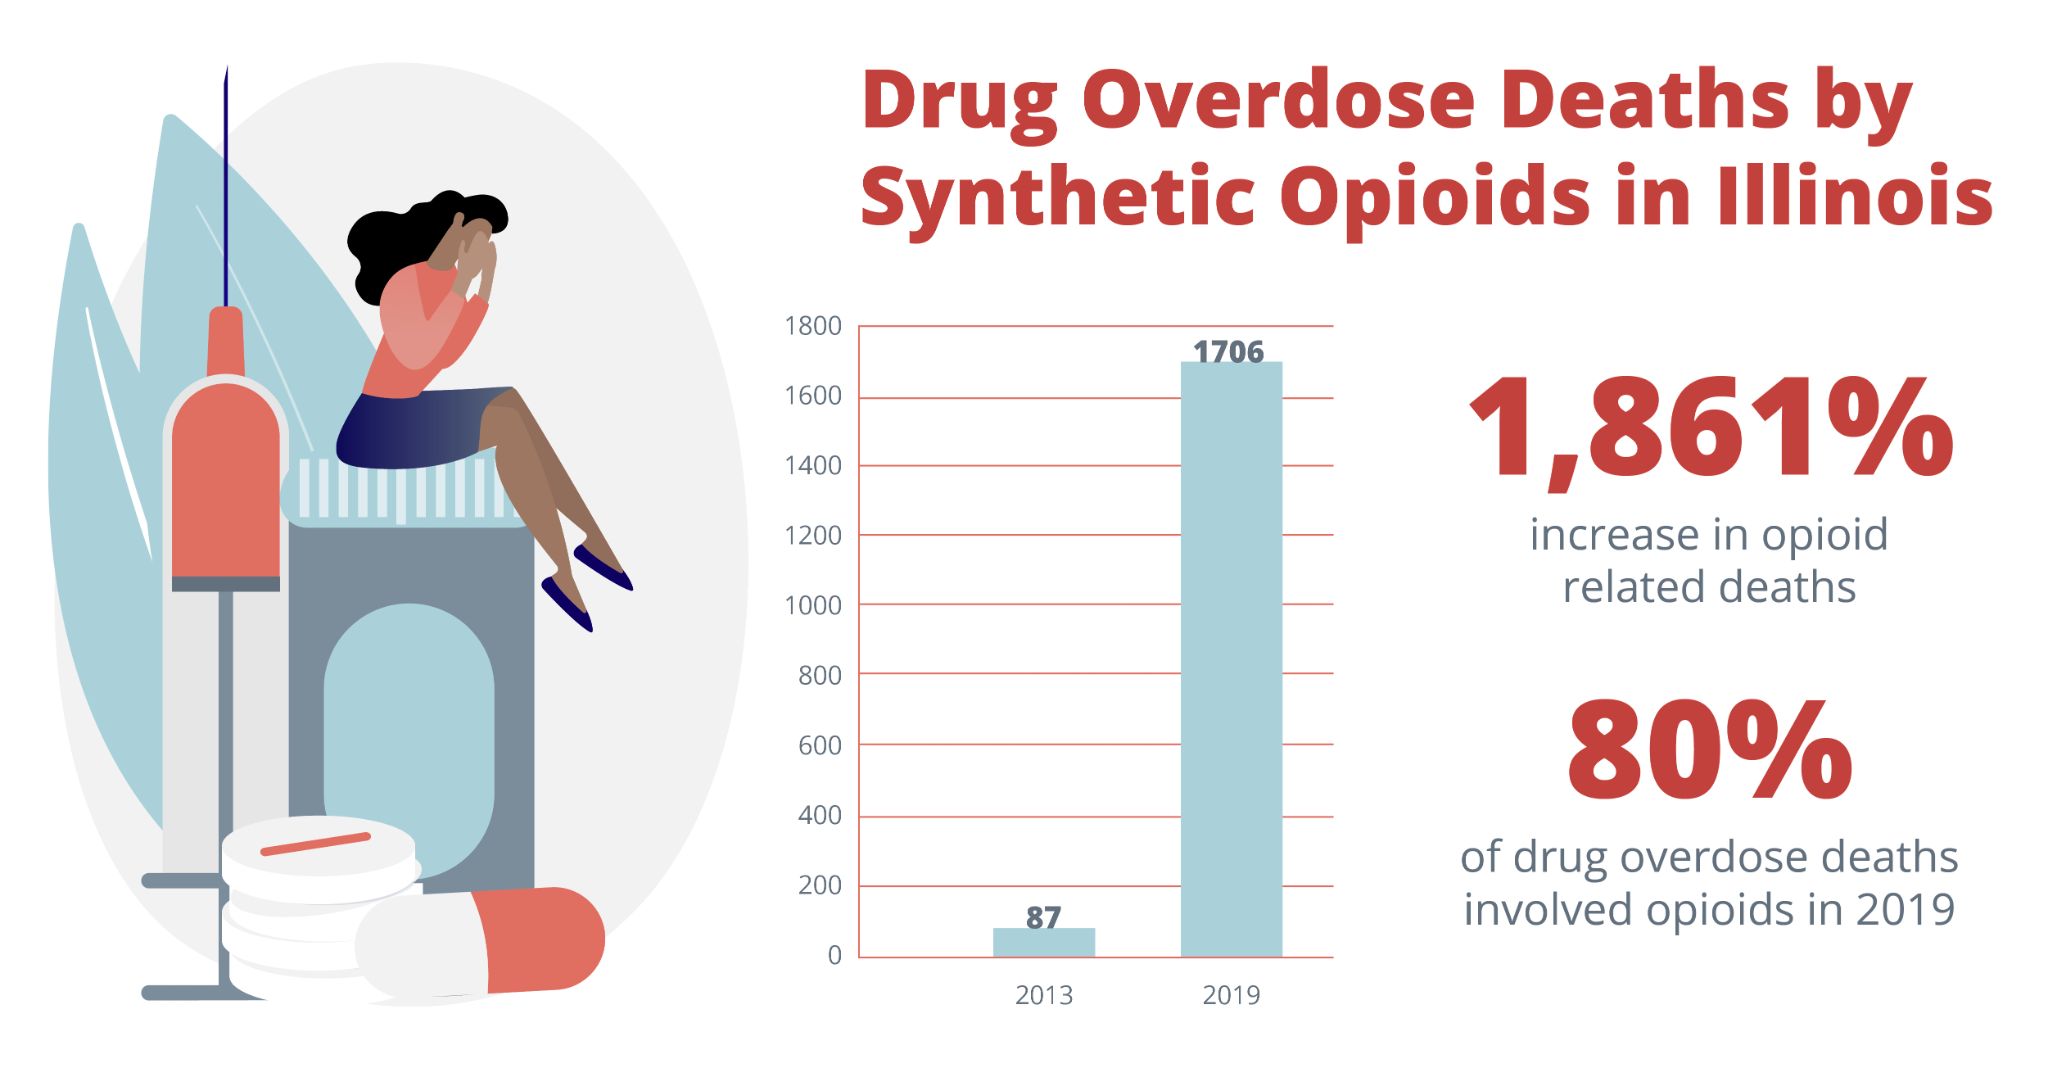 Drug overdose deaths by synthetic opioids in illinois. 1,861% increase in opioid related deaths. 80% of drug overdose deaths involved opioids in 2019.Drug And Alcohol Detox & Rehab, Addiction Treatment Resources in Bloomington Illinois